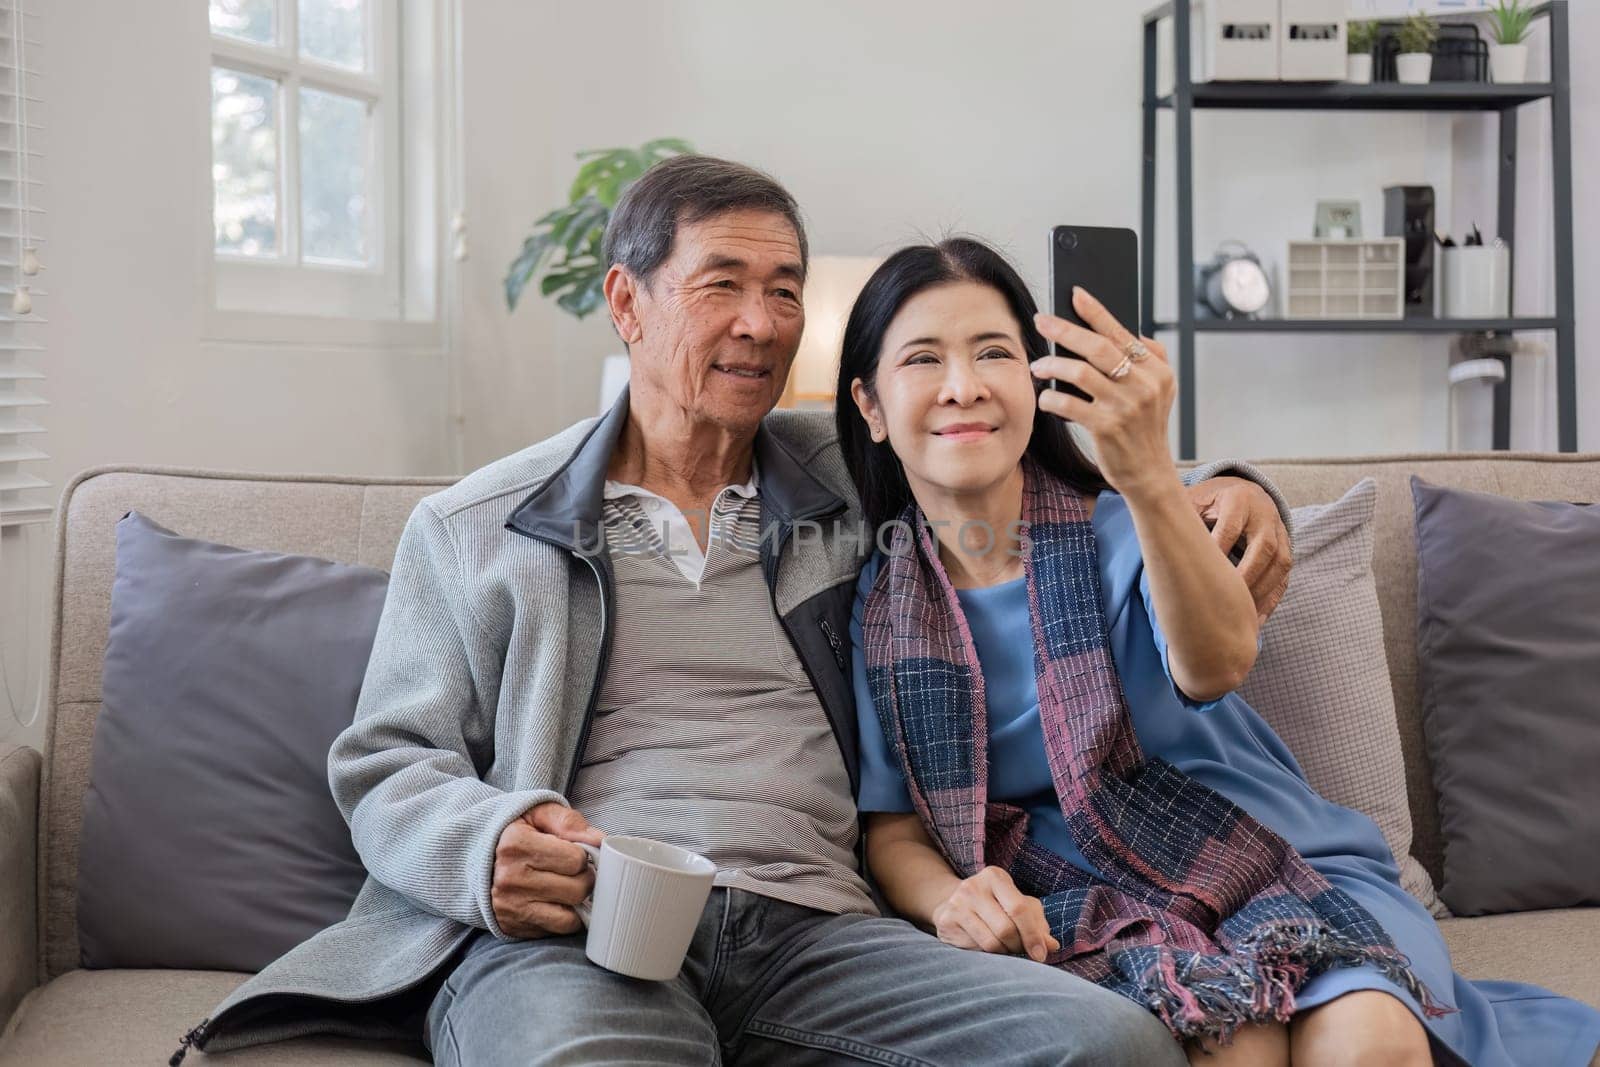 Senior couple in their 60s video chat greeting each other on vacation Have fun together on the sofa in the living room..